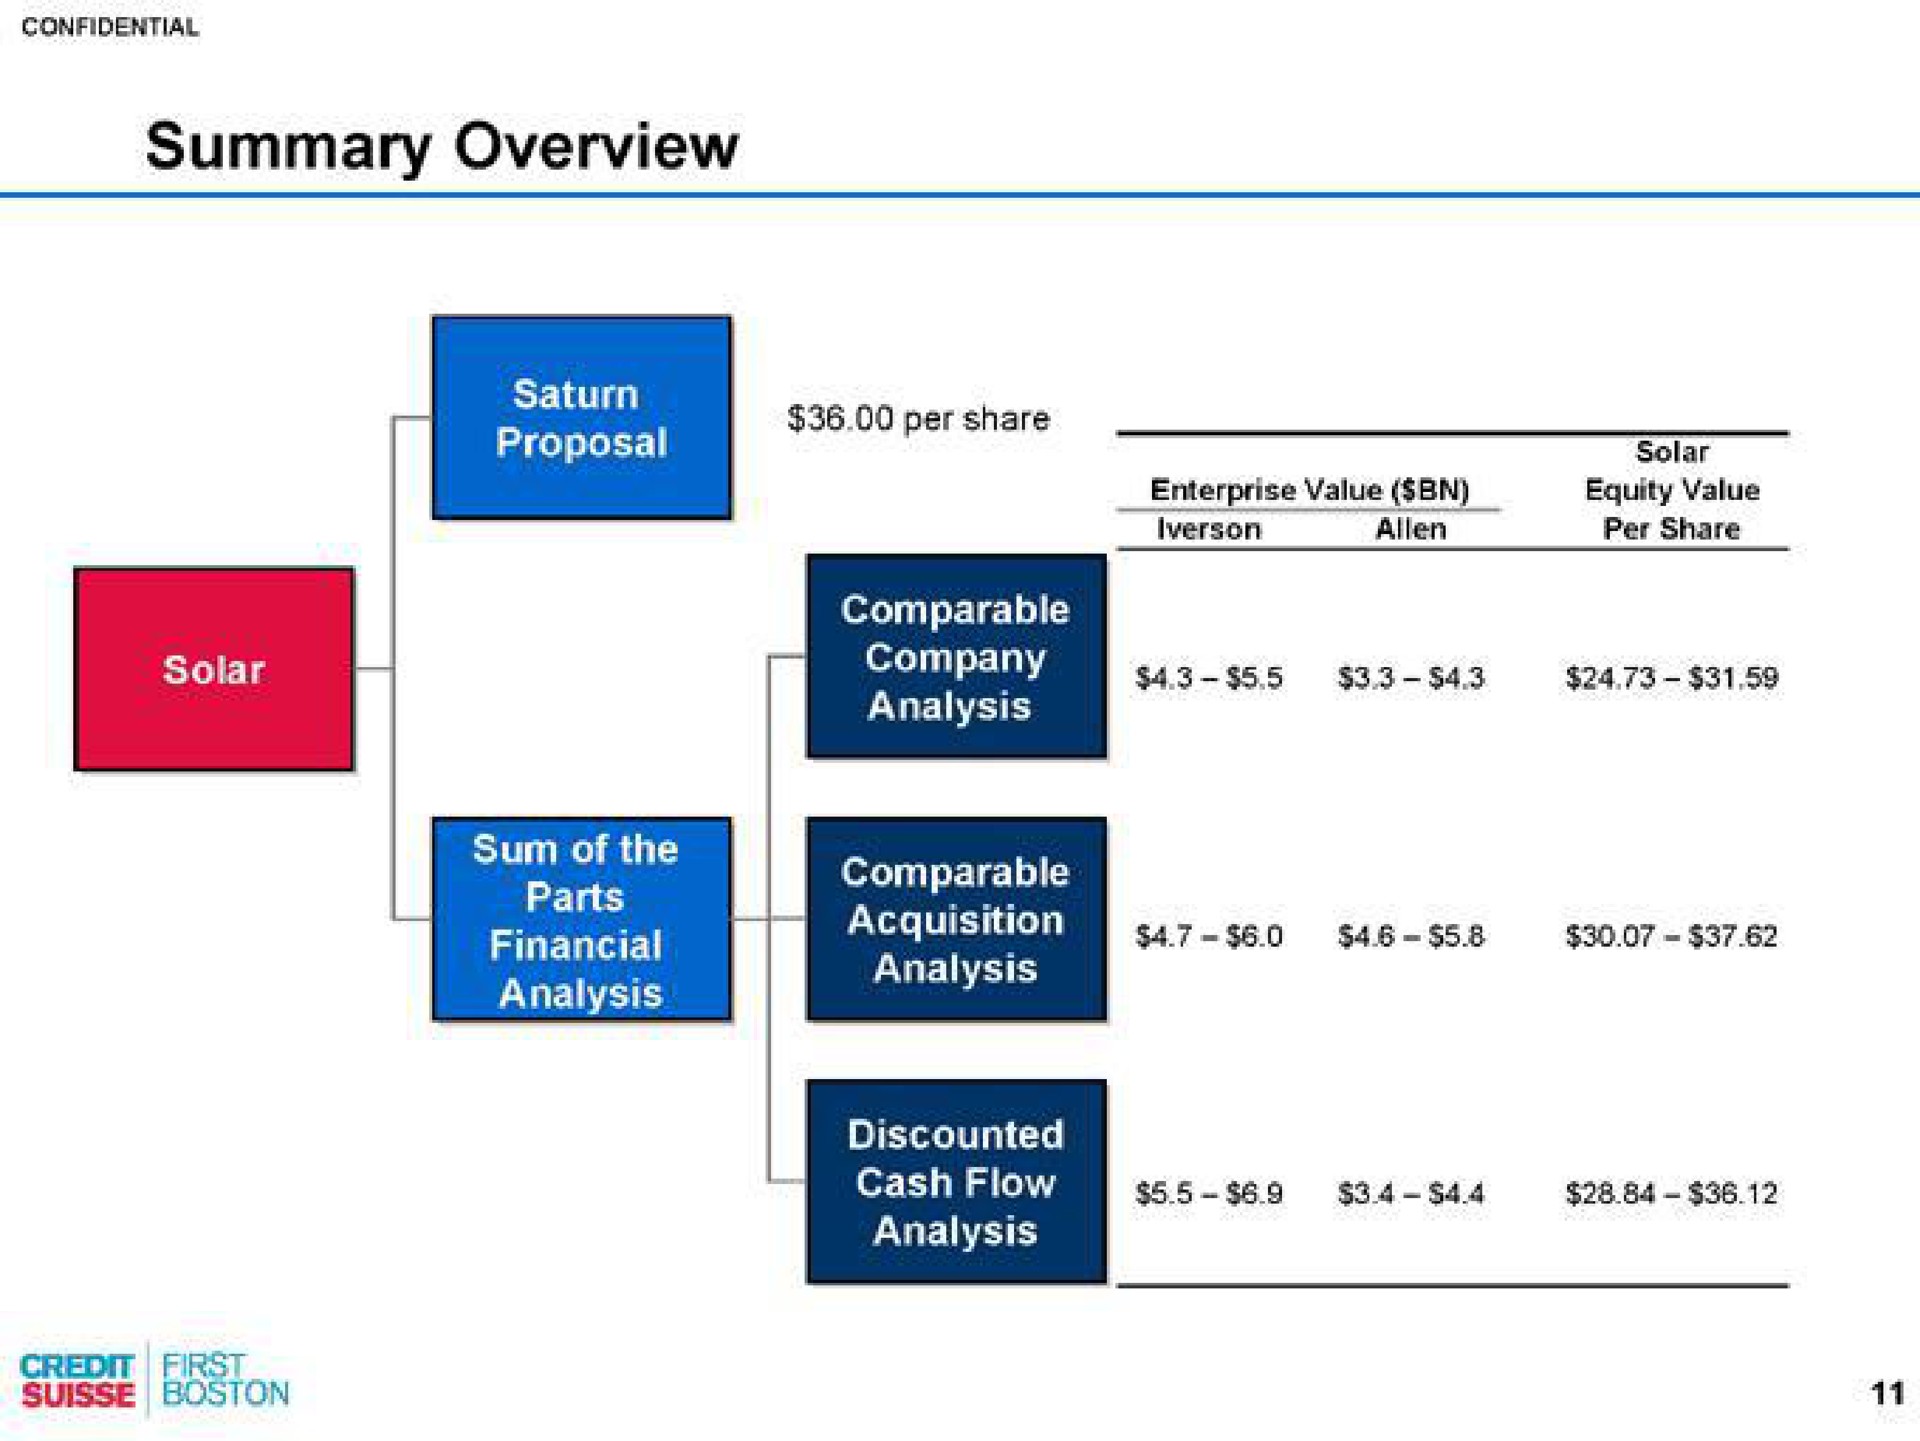 summary overview financial | Credit Suisse